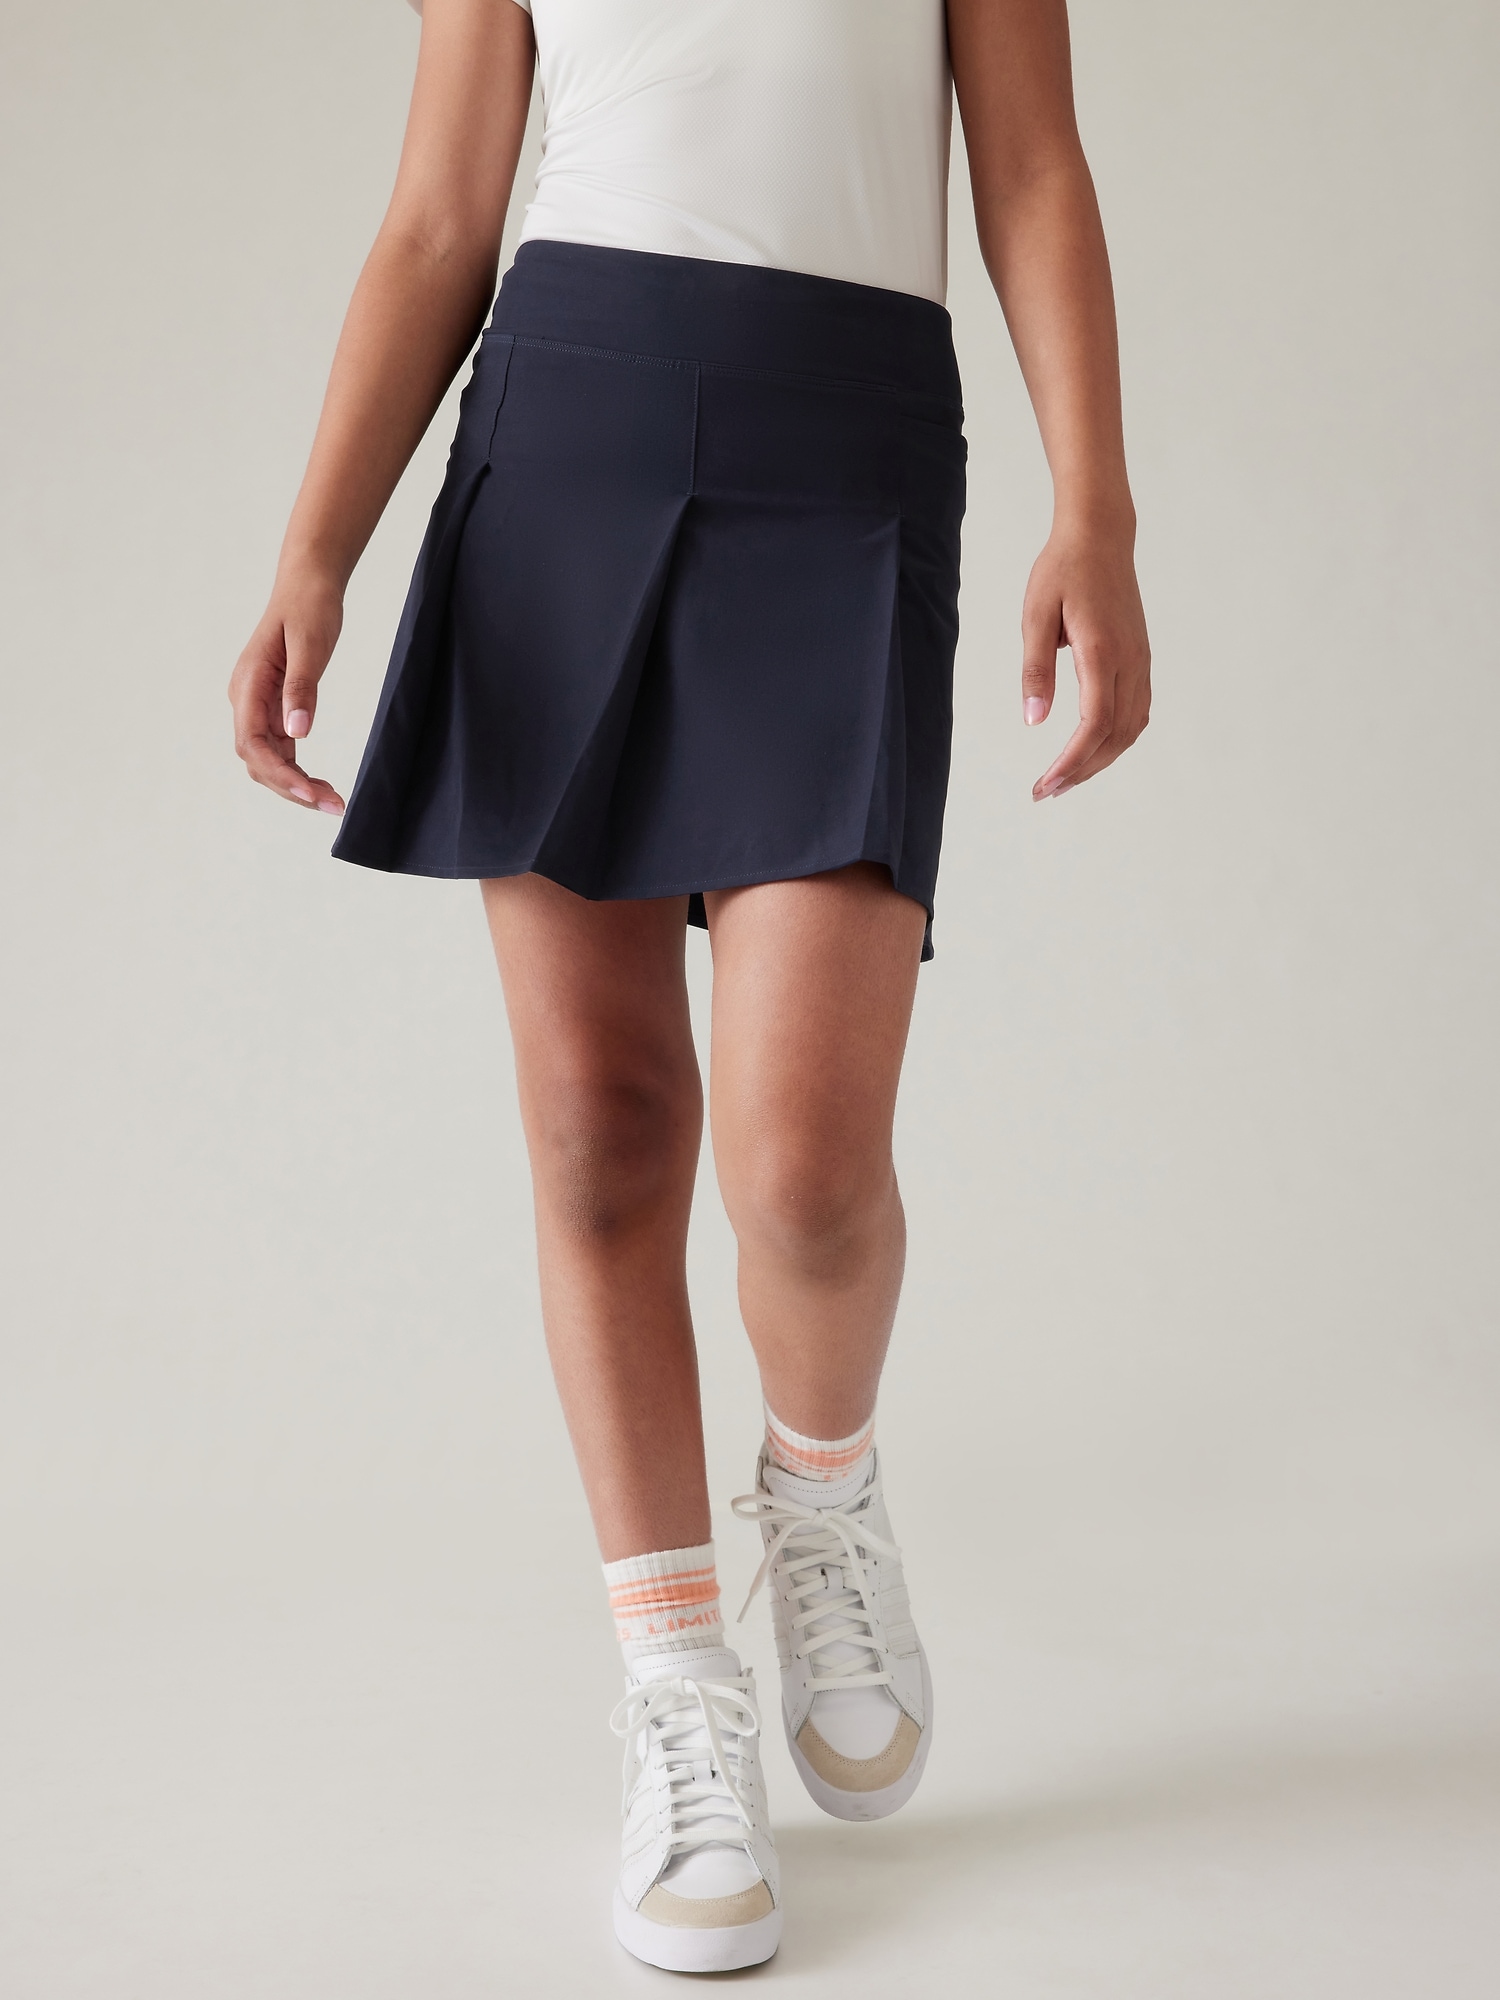 Athletic Skirts with Shorts